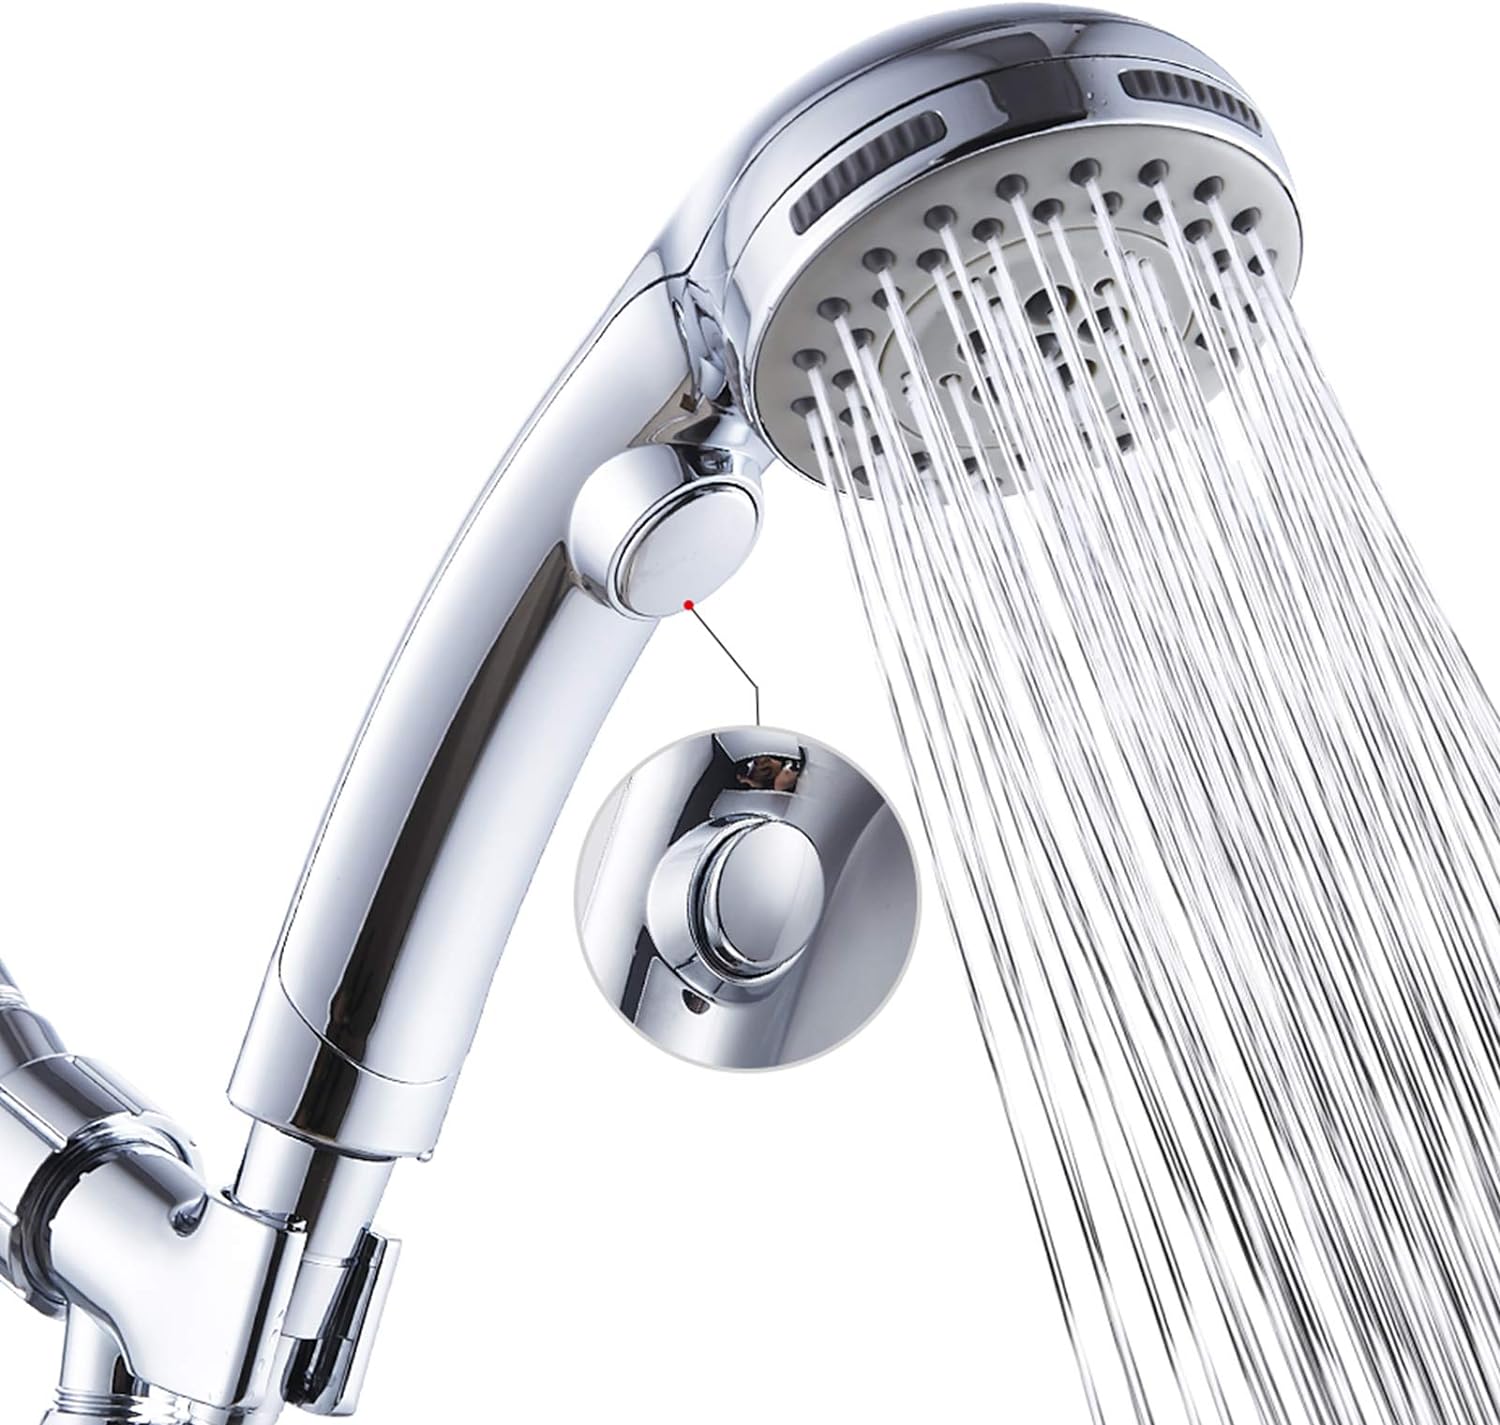 Handheld Shower Head with High Pressure 8 Sprays EMBATHER 4.5 Inches Hand Held Showerhead Set with 71 Inches Shower Hose and Adjustable Shower Arm Bracket Brushed Nickel